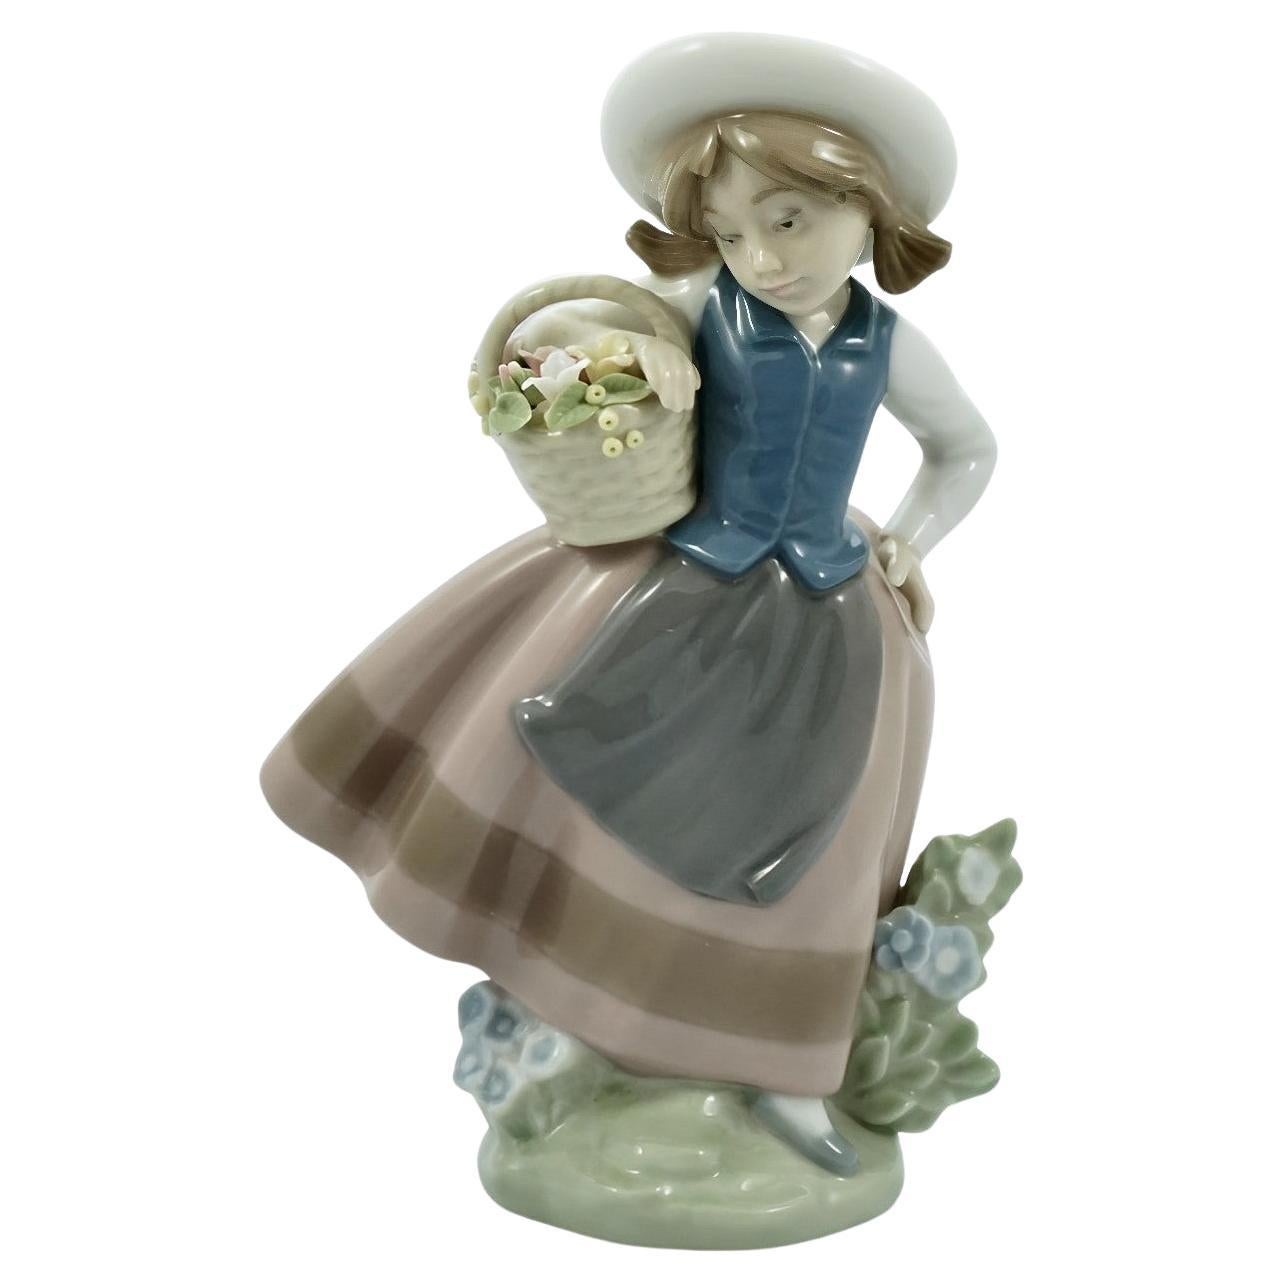 Lladro Sweet Scent Porcelain Girl with Flowers circa 1990s